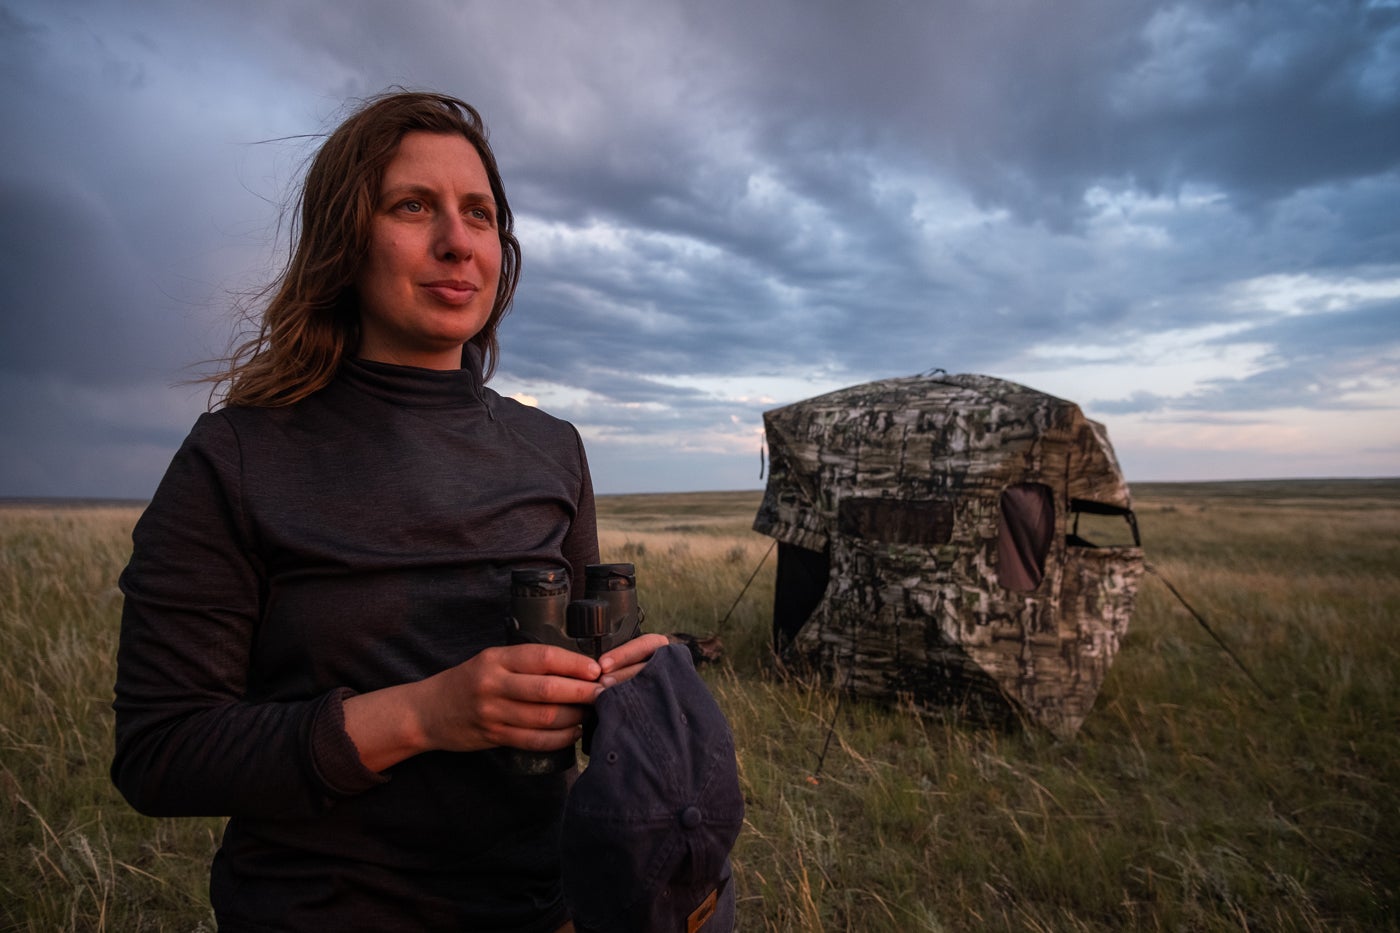 Landscape ecologist Hila Shamon stands on the open prairie in Montana. A camouflage blind tent can be seen behind her, and she holds a hat and a pair of binoculars in her hands.